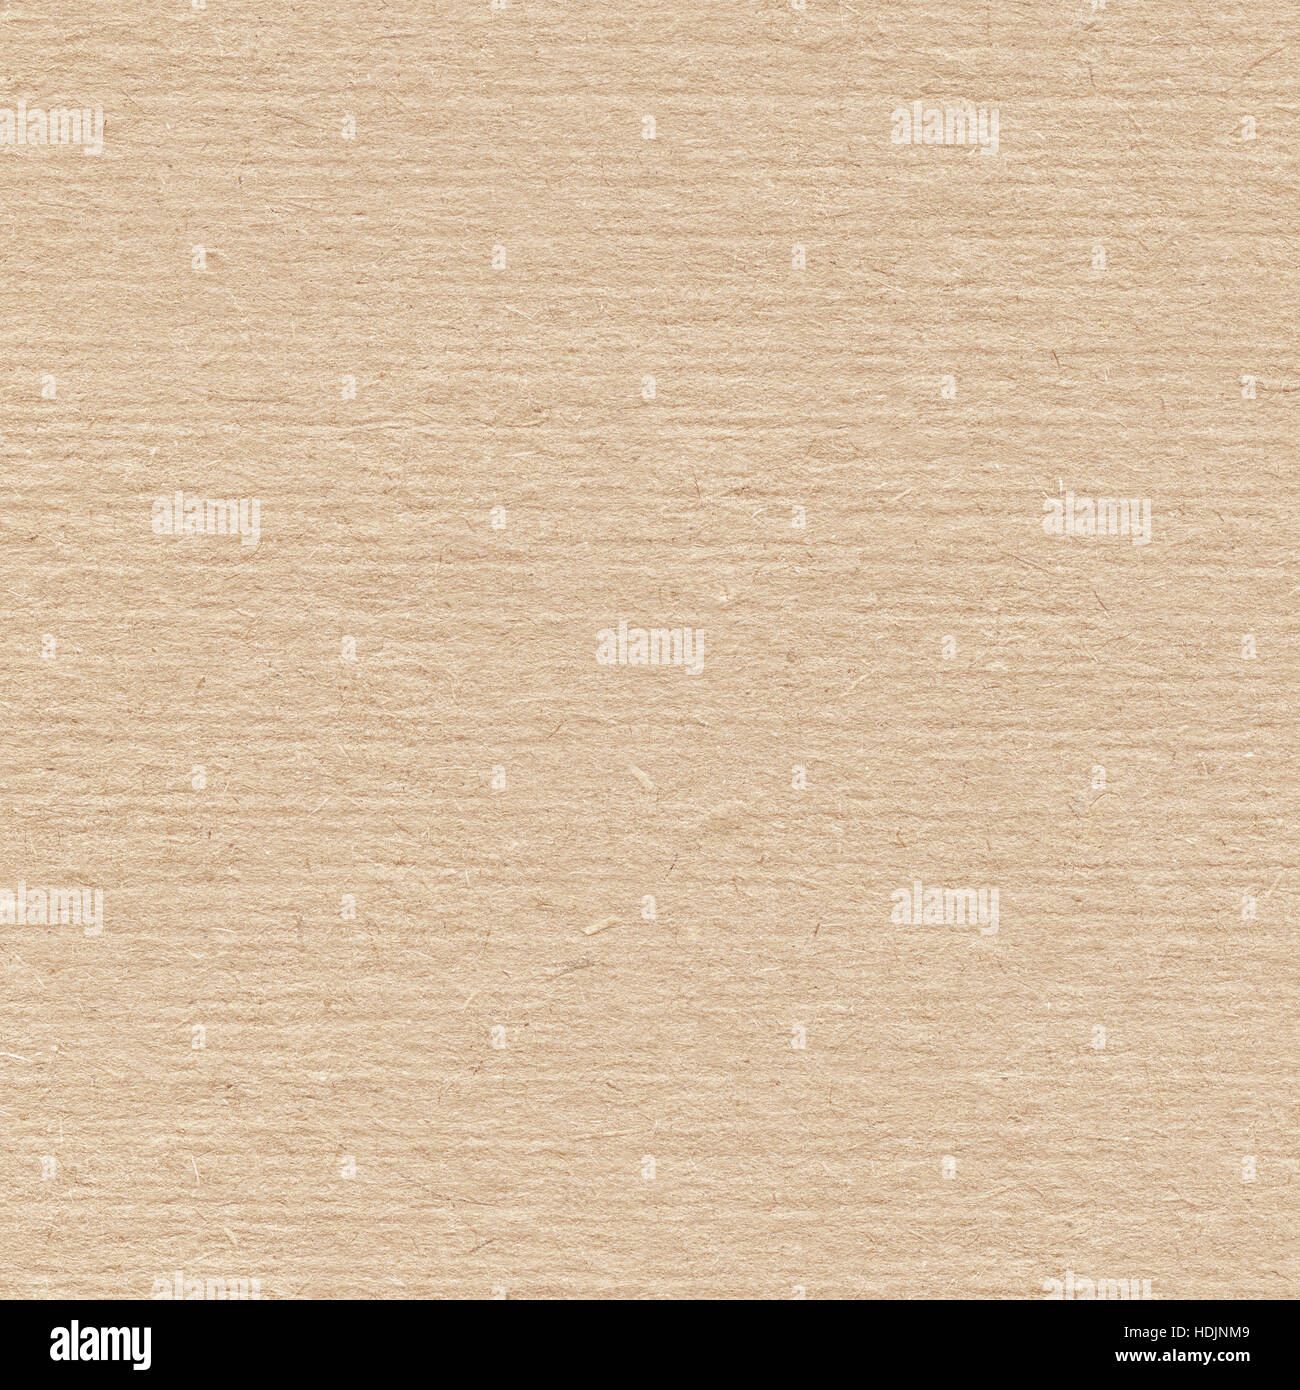 Brown rough, grainy recycled paper texture Stock Photo